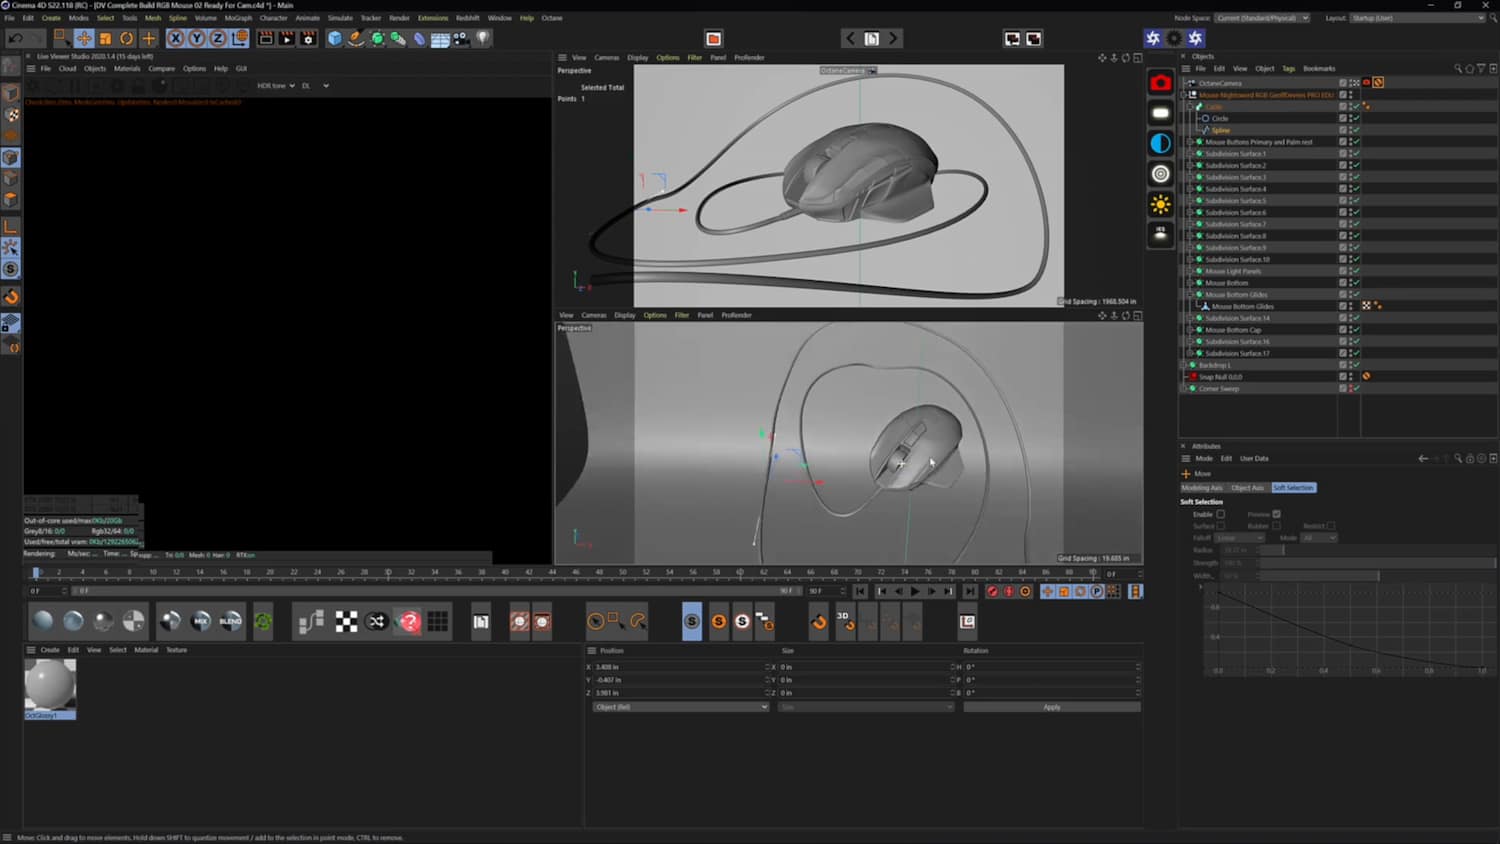 product photography cinema 4d tutorial. How to build products and 3d models in Cinema 4d. PROEDU.com 